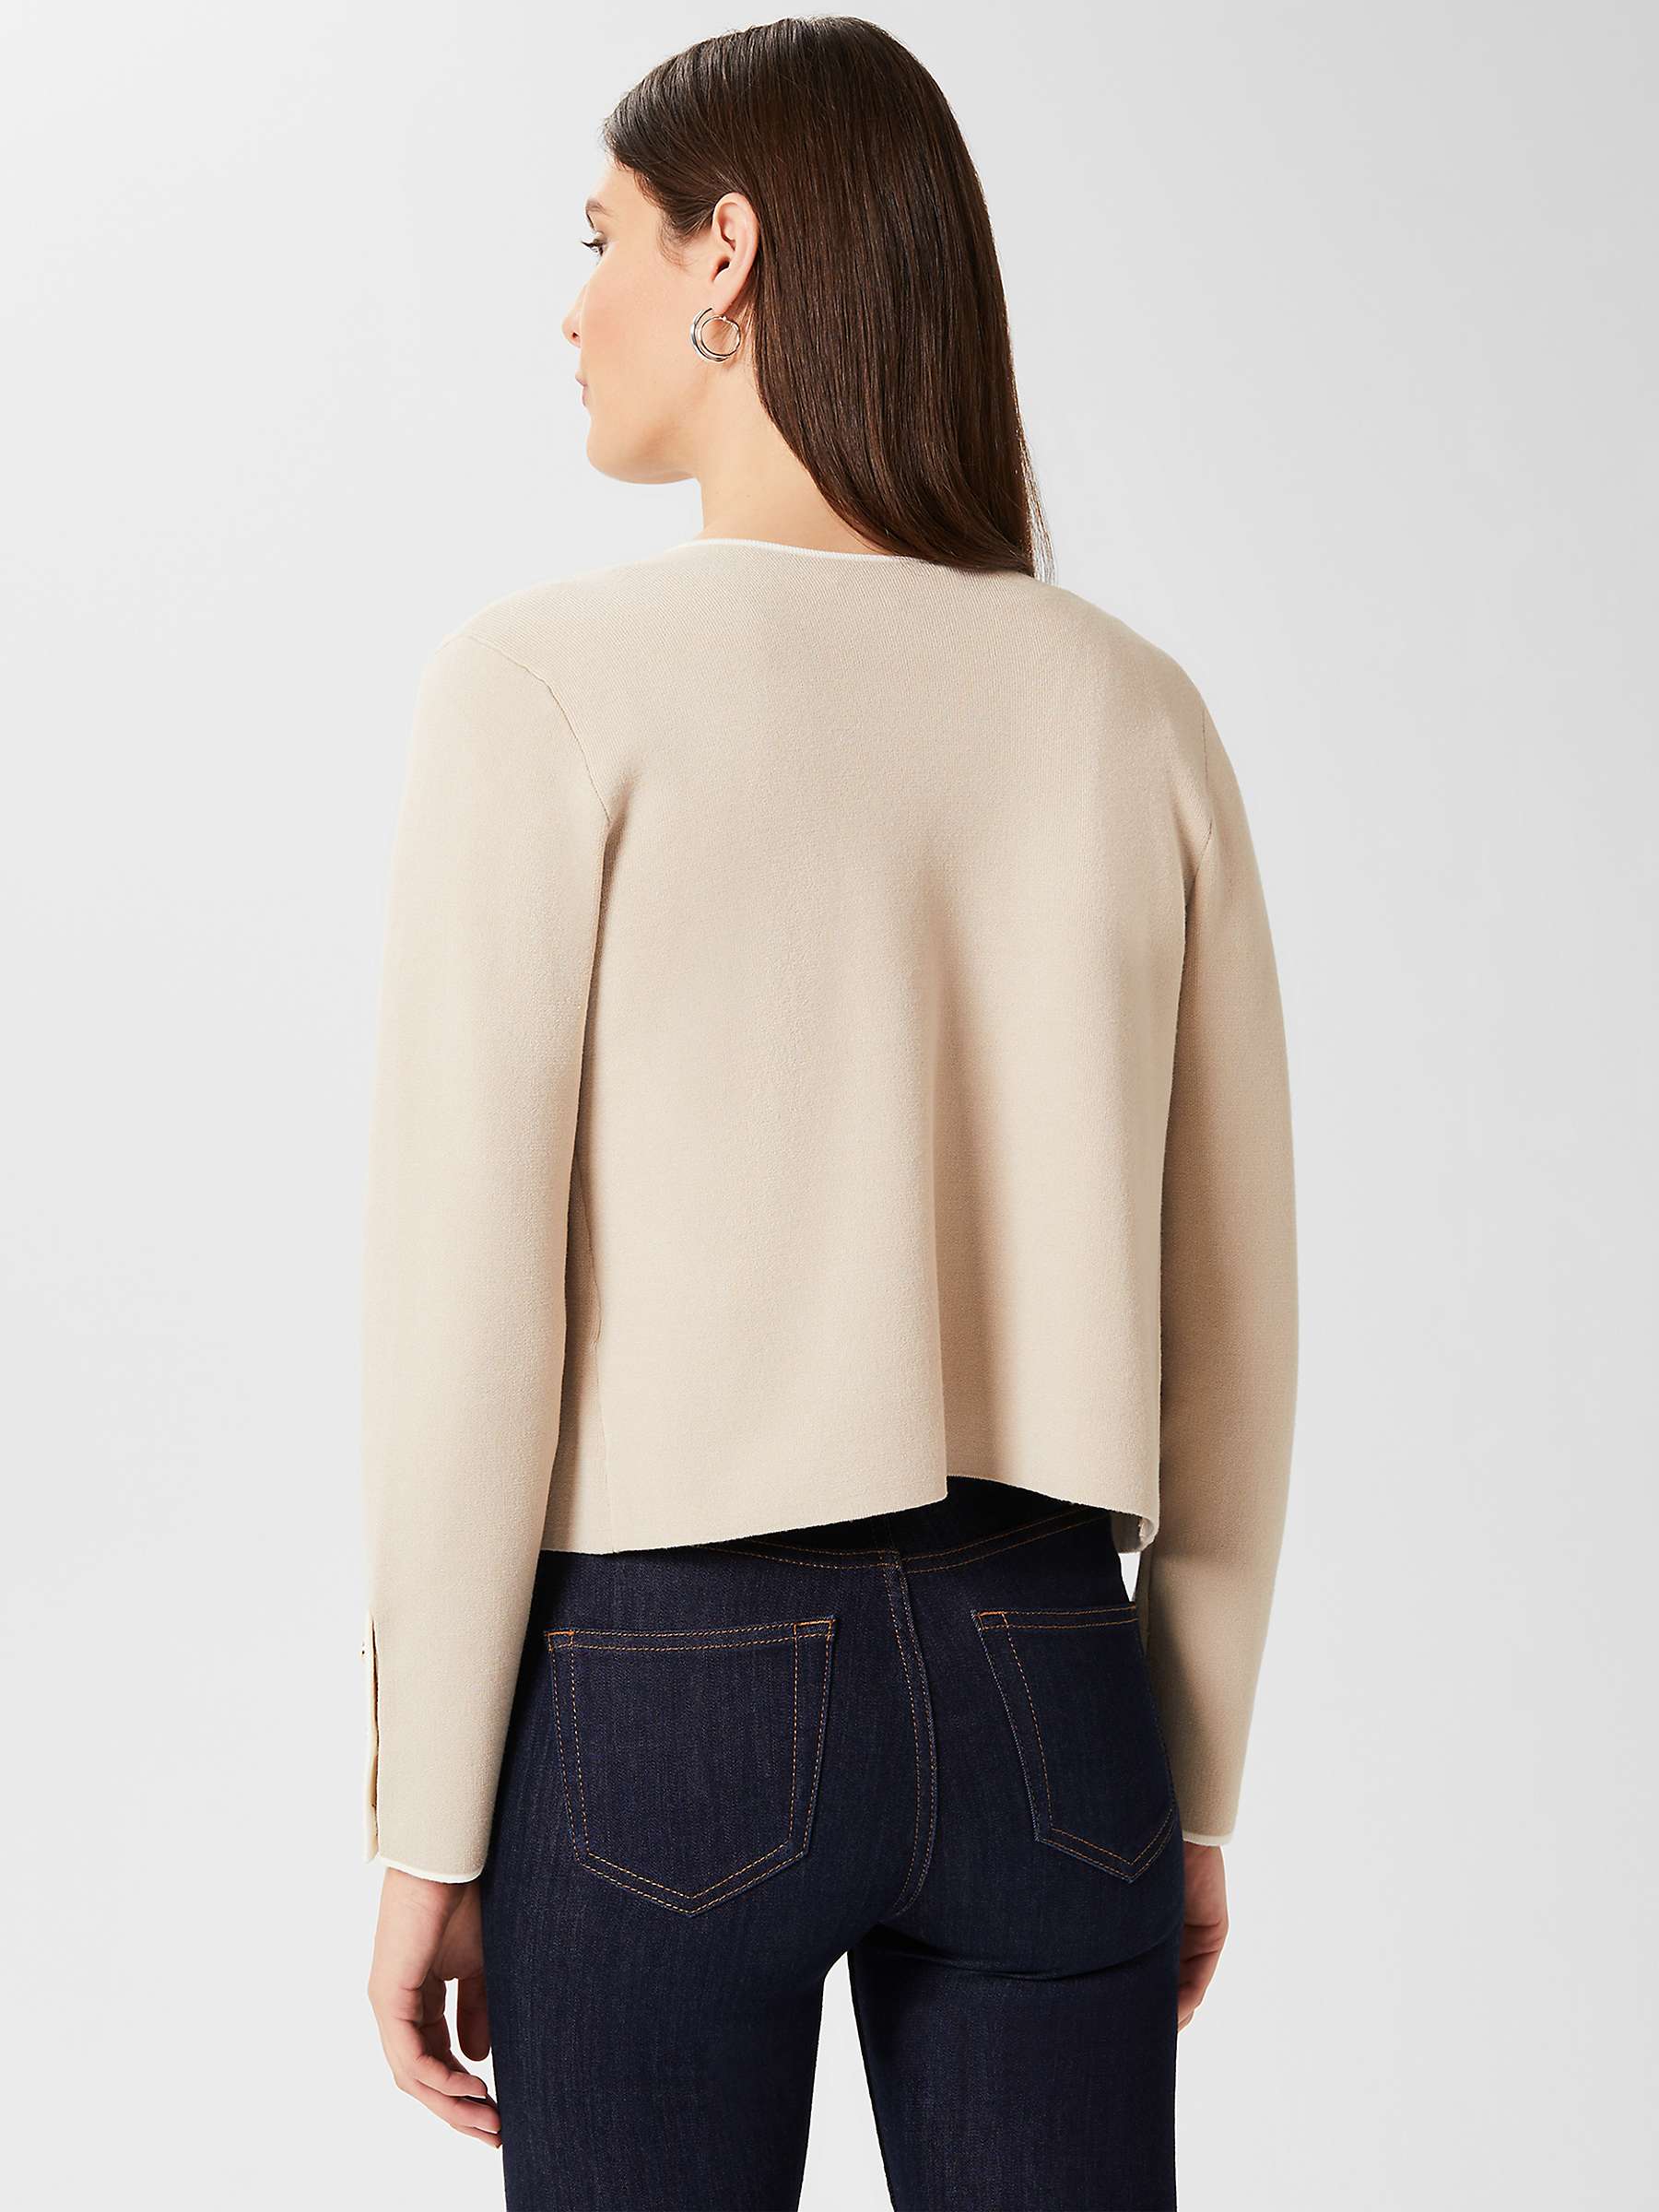 Hobbs Darcy Knitted Jacket, Stone Ivory at John Lewis & Partners